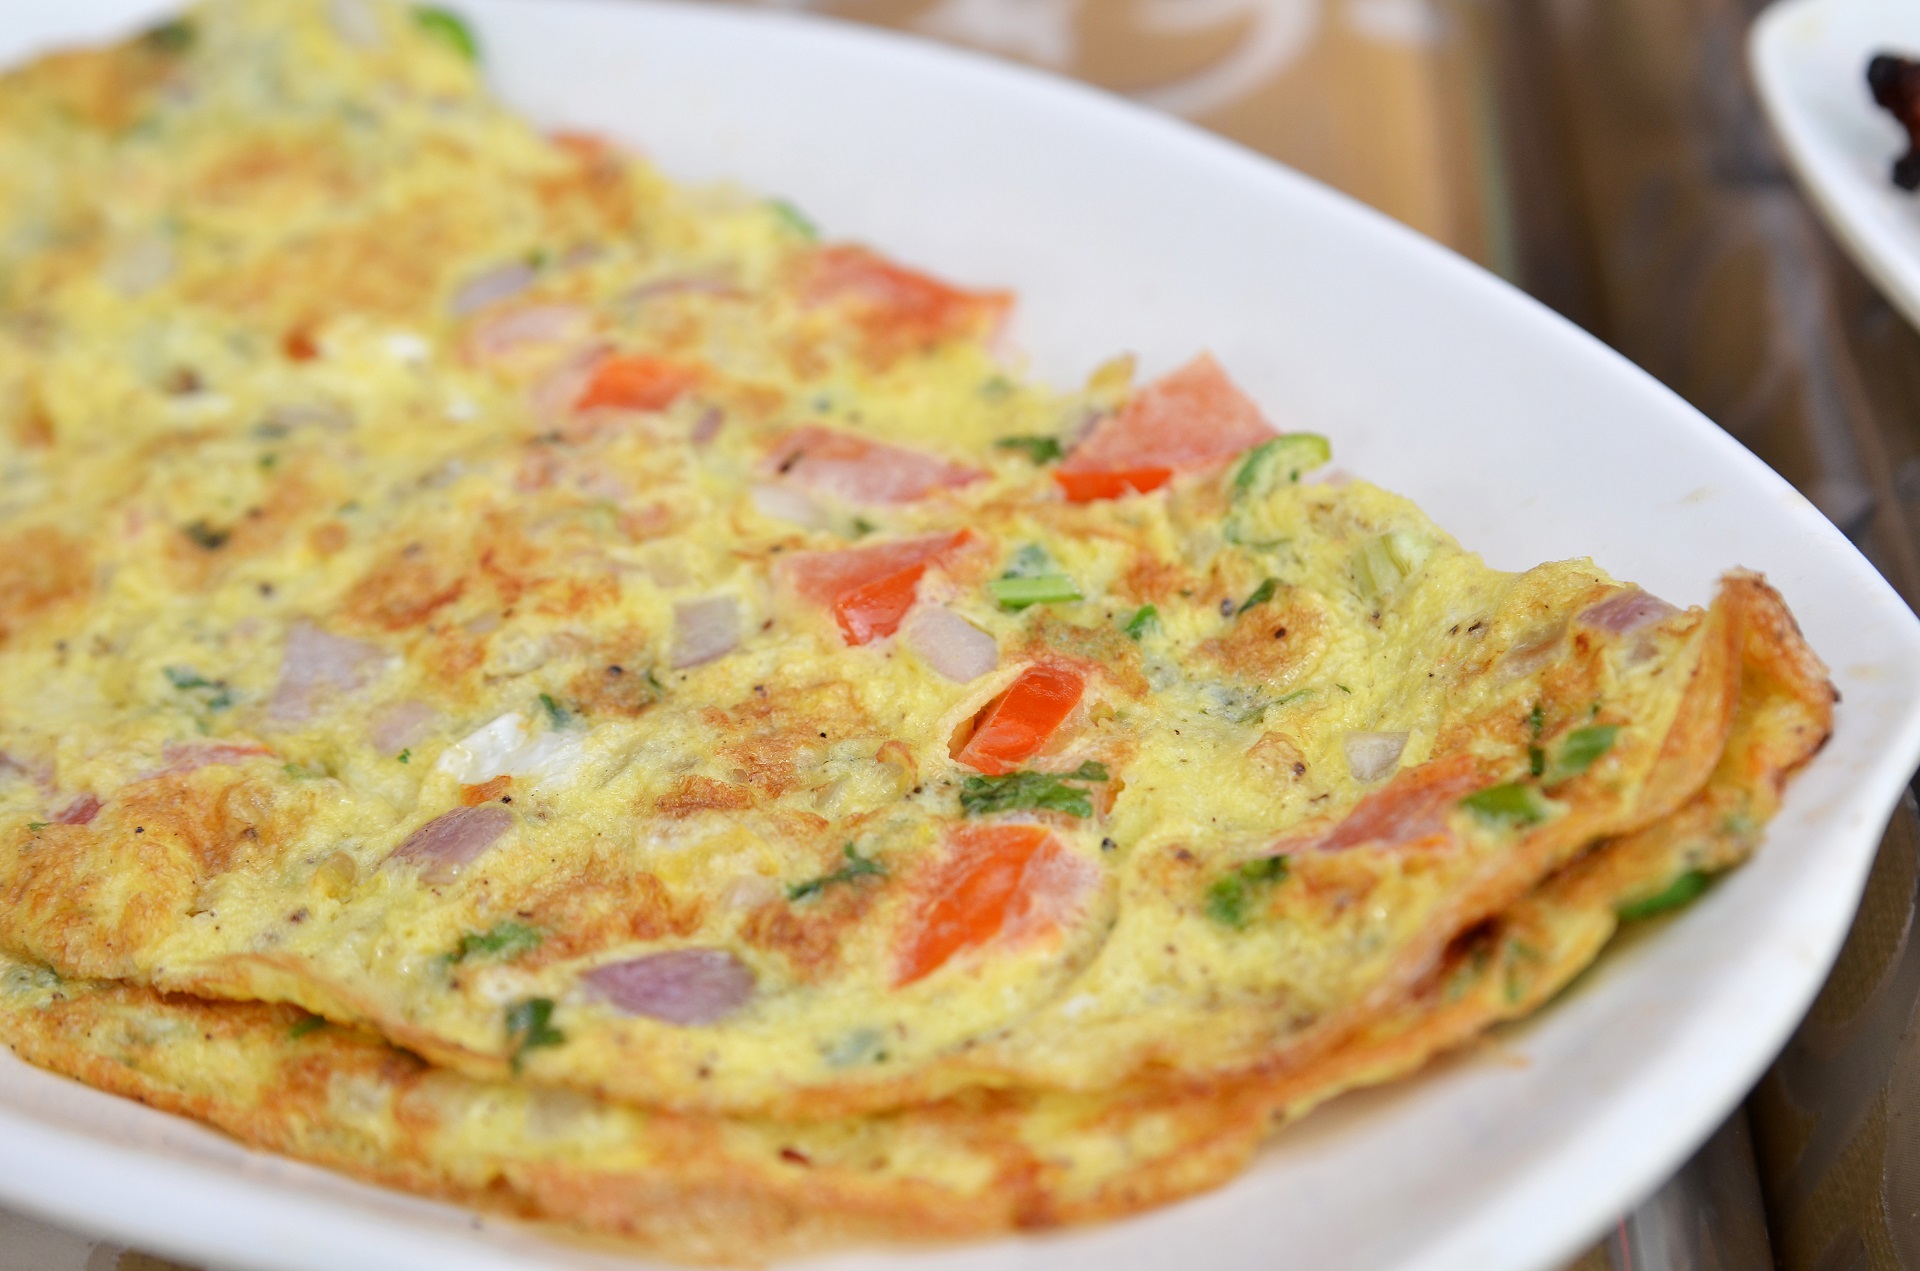 Recipe for Indian-style masala omelet